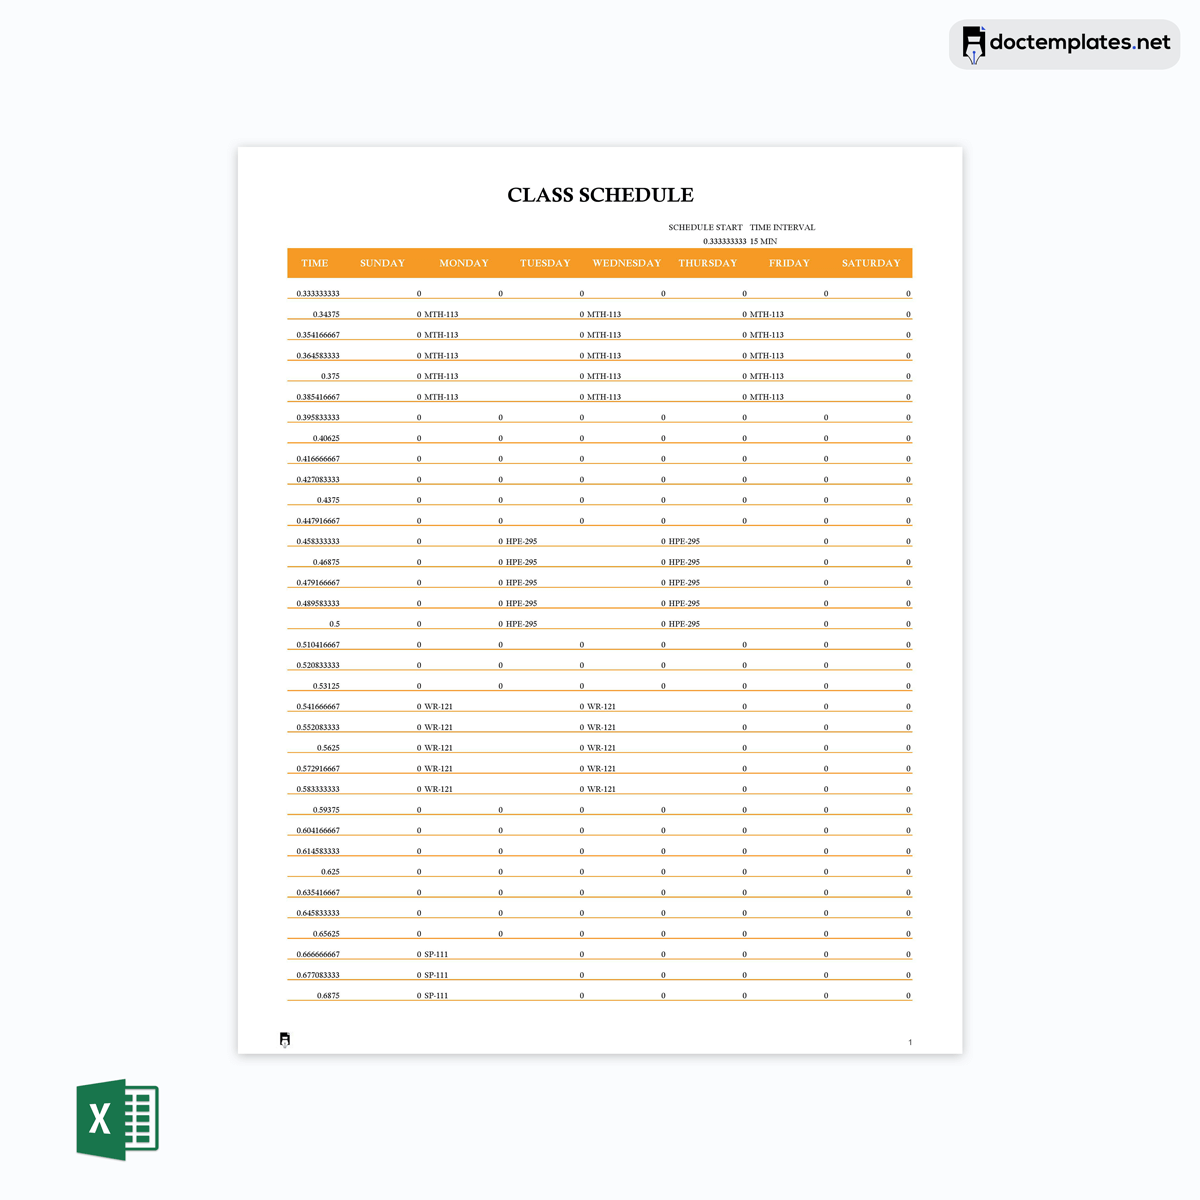 Weekly schedule template
-1